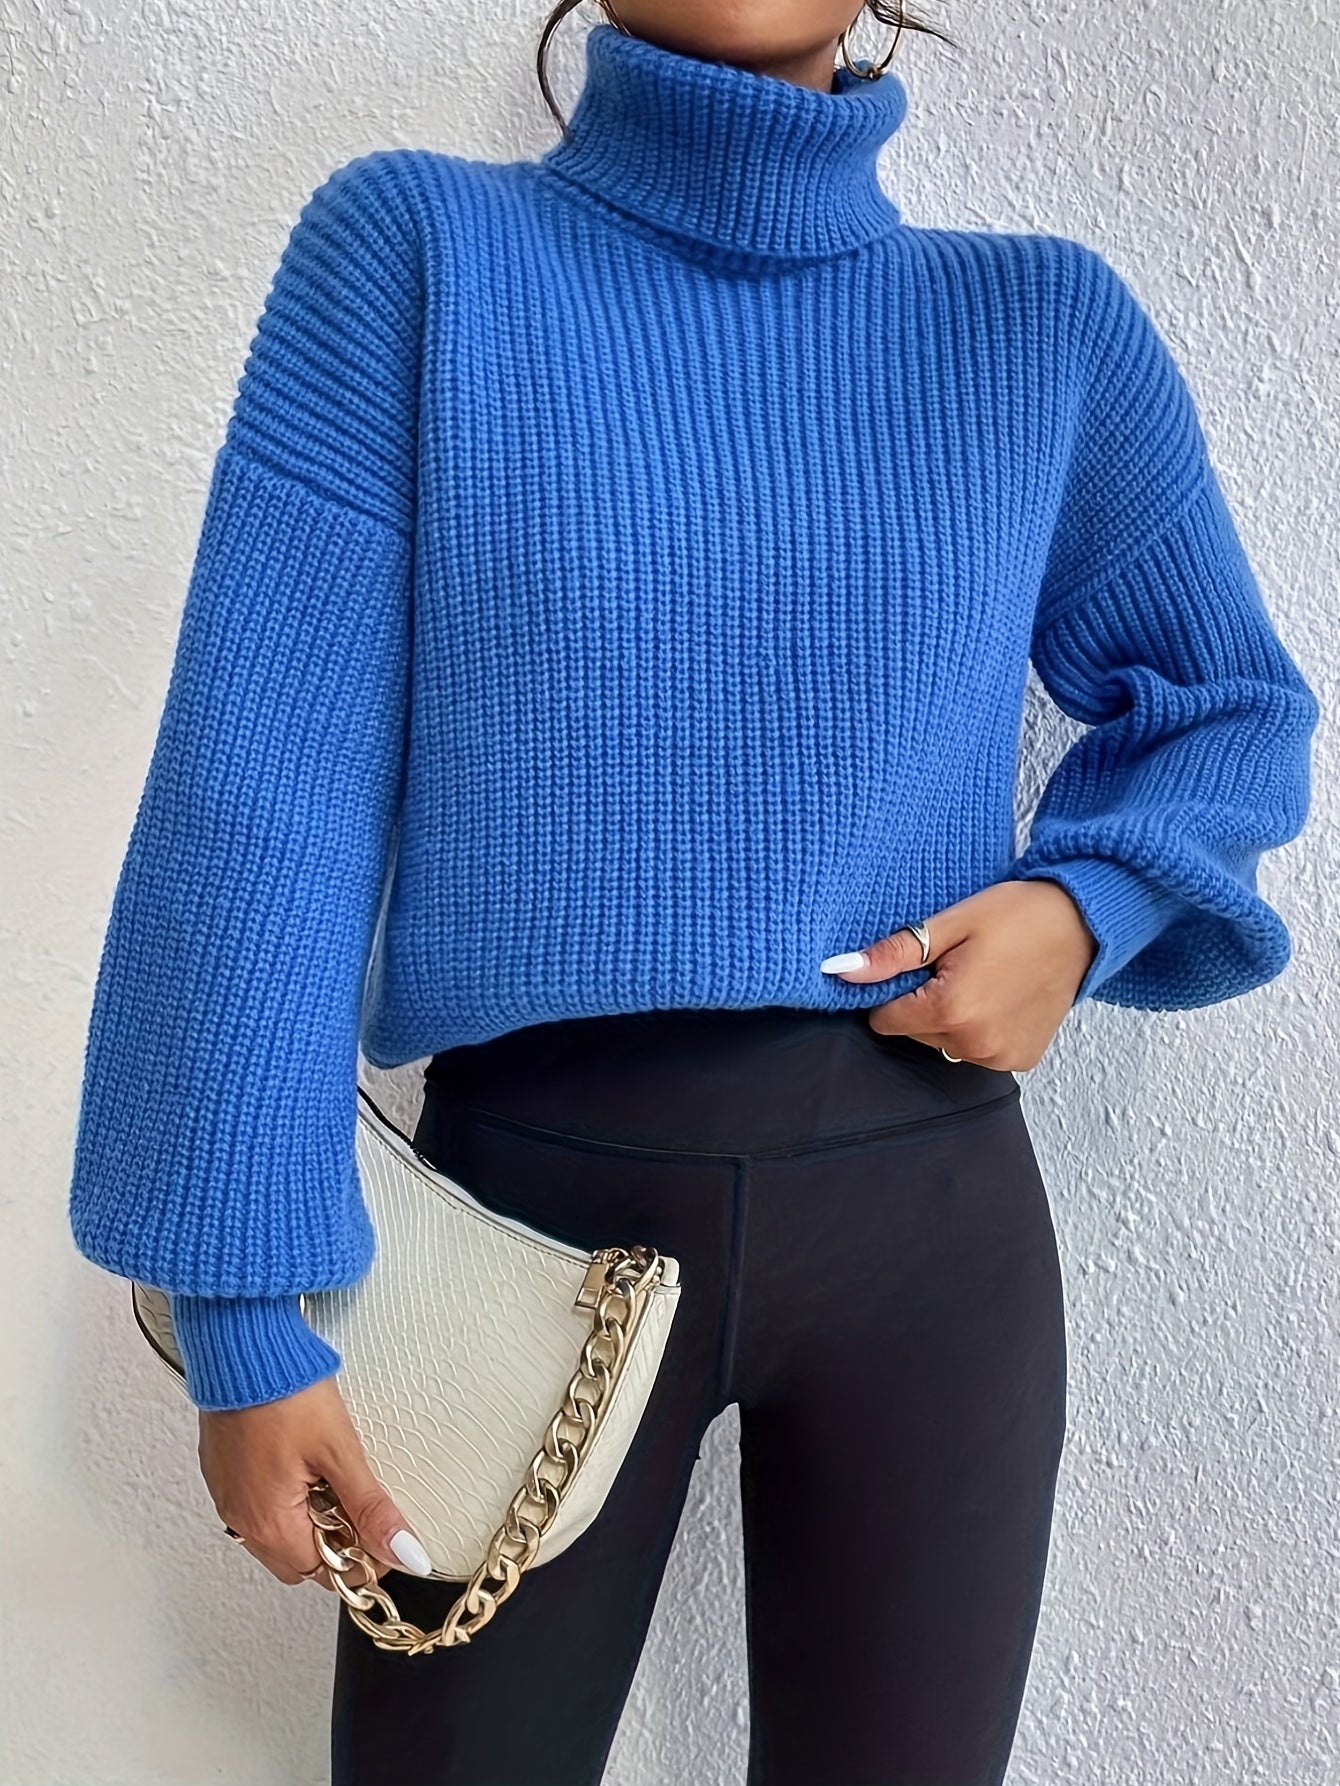 Antmvs Solid Turtle Neck Sweater, Casual Long Sleeve Drop Shoulder Sweater, Women's Clothing